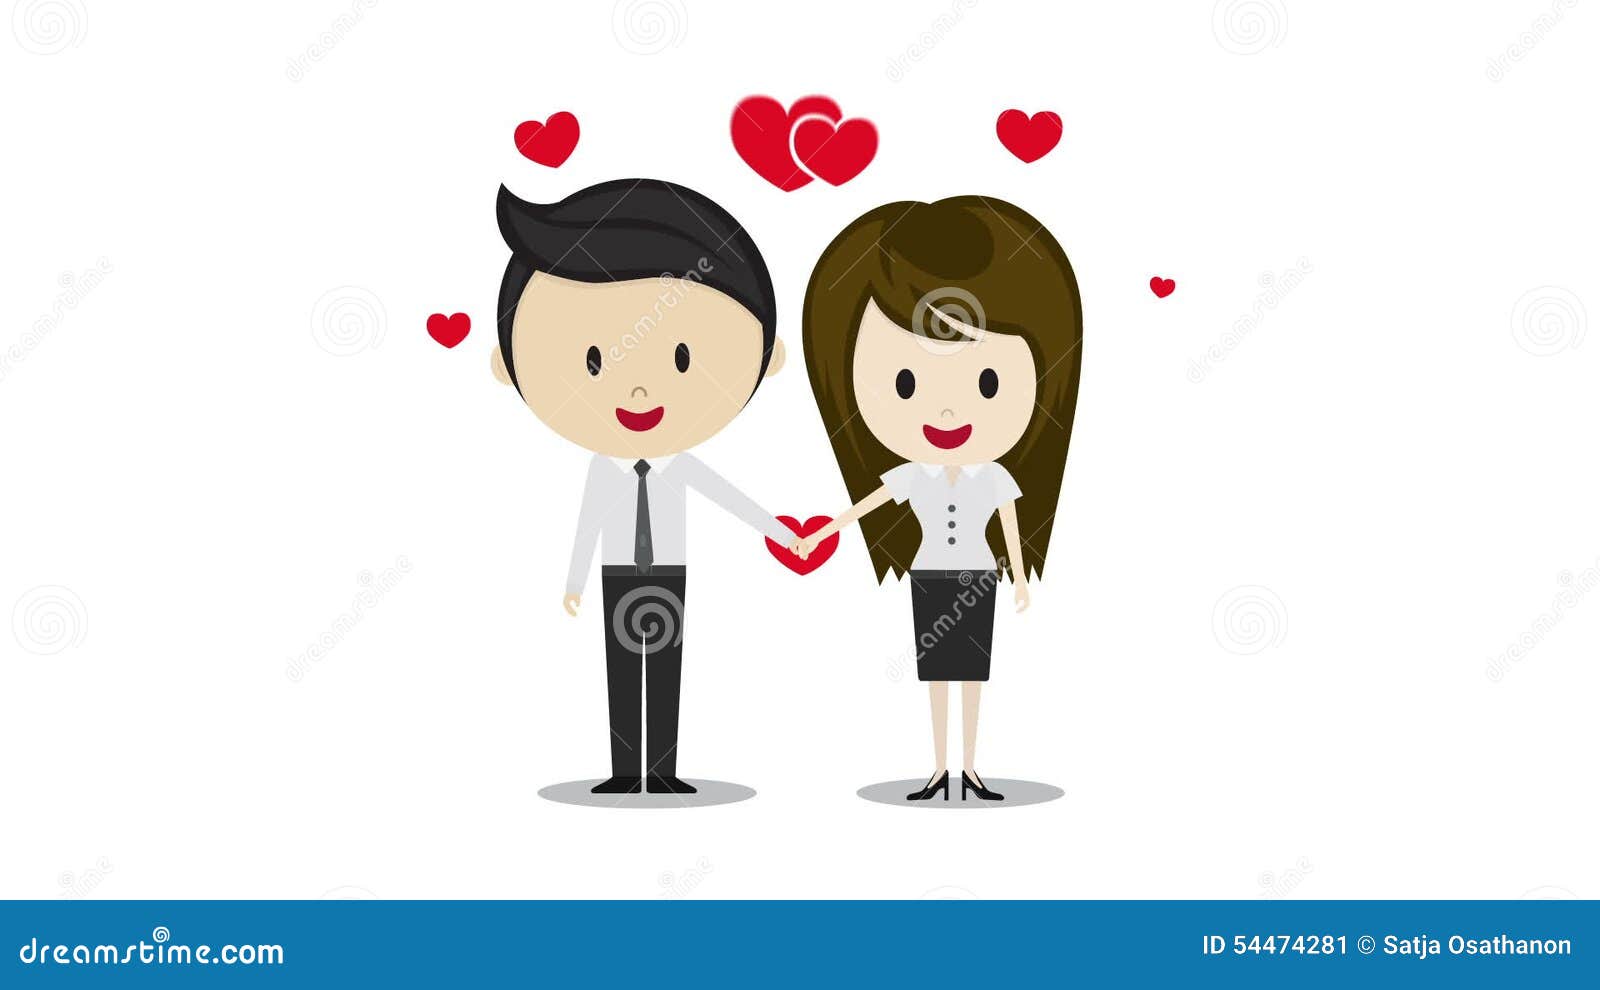 Cartoon Love Couple Animated Pictures - Get Images Two